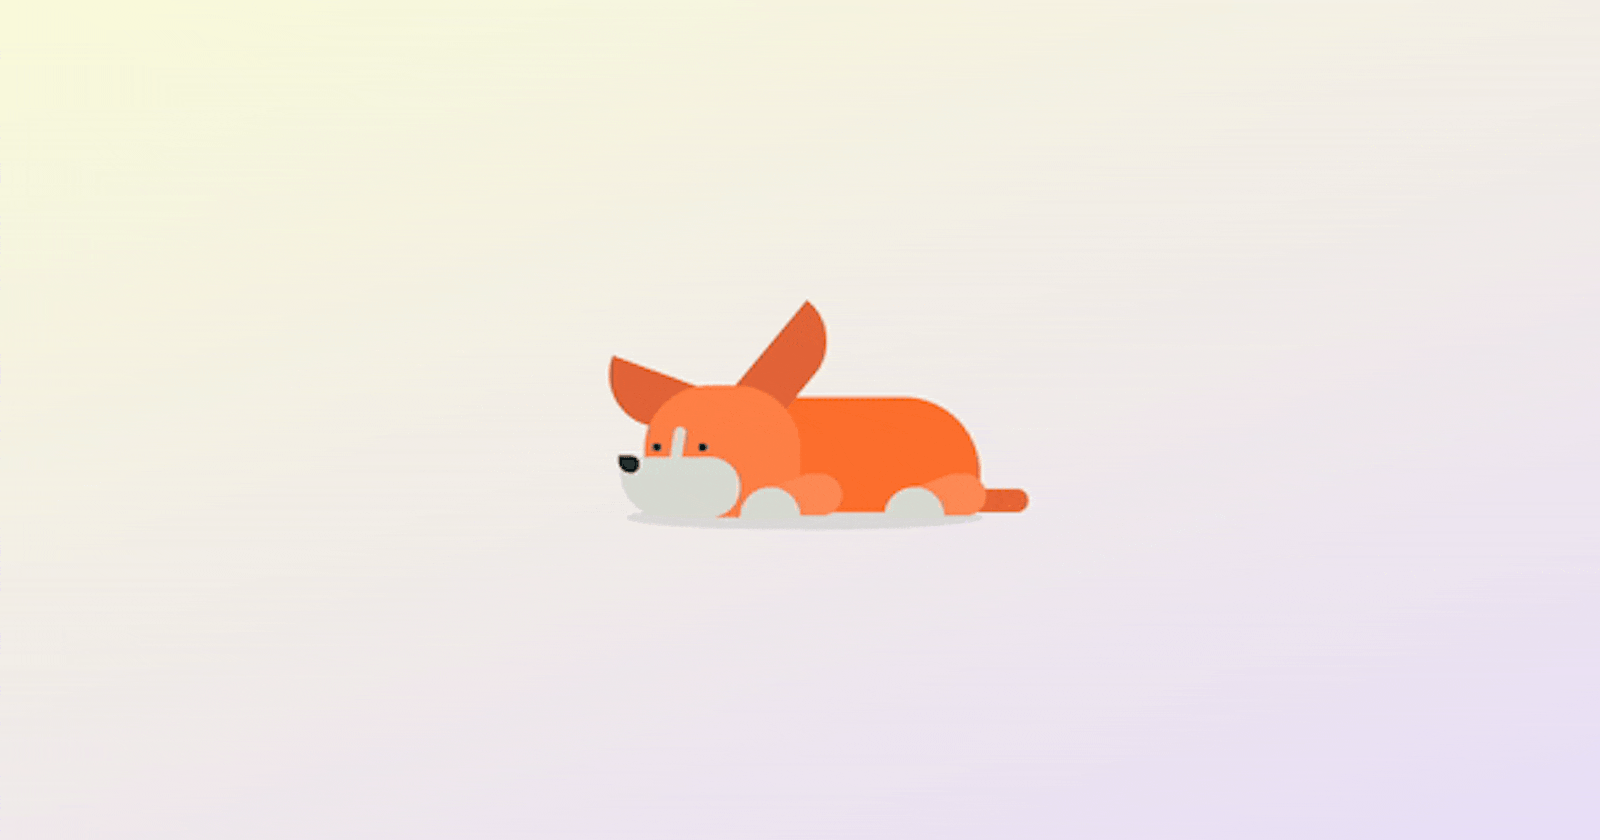 Creating an Animated Puppy Using HTML and CSS